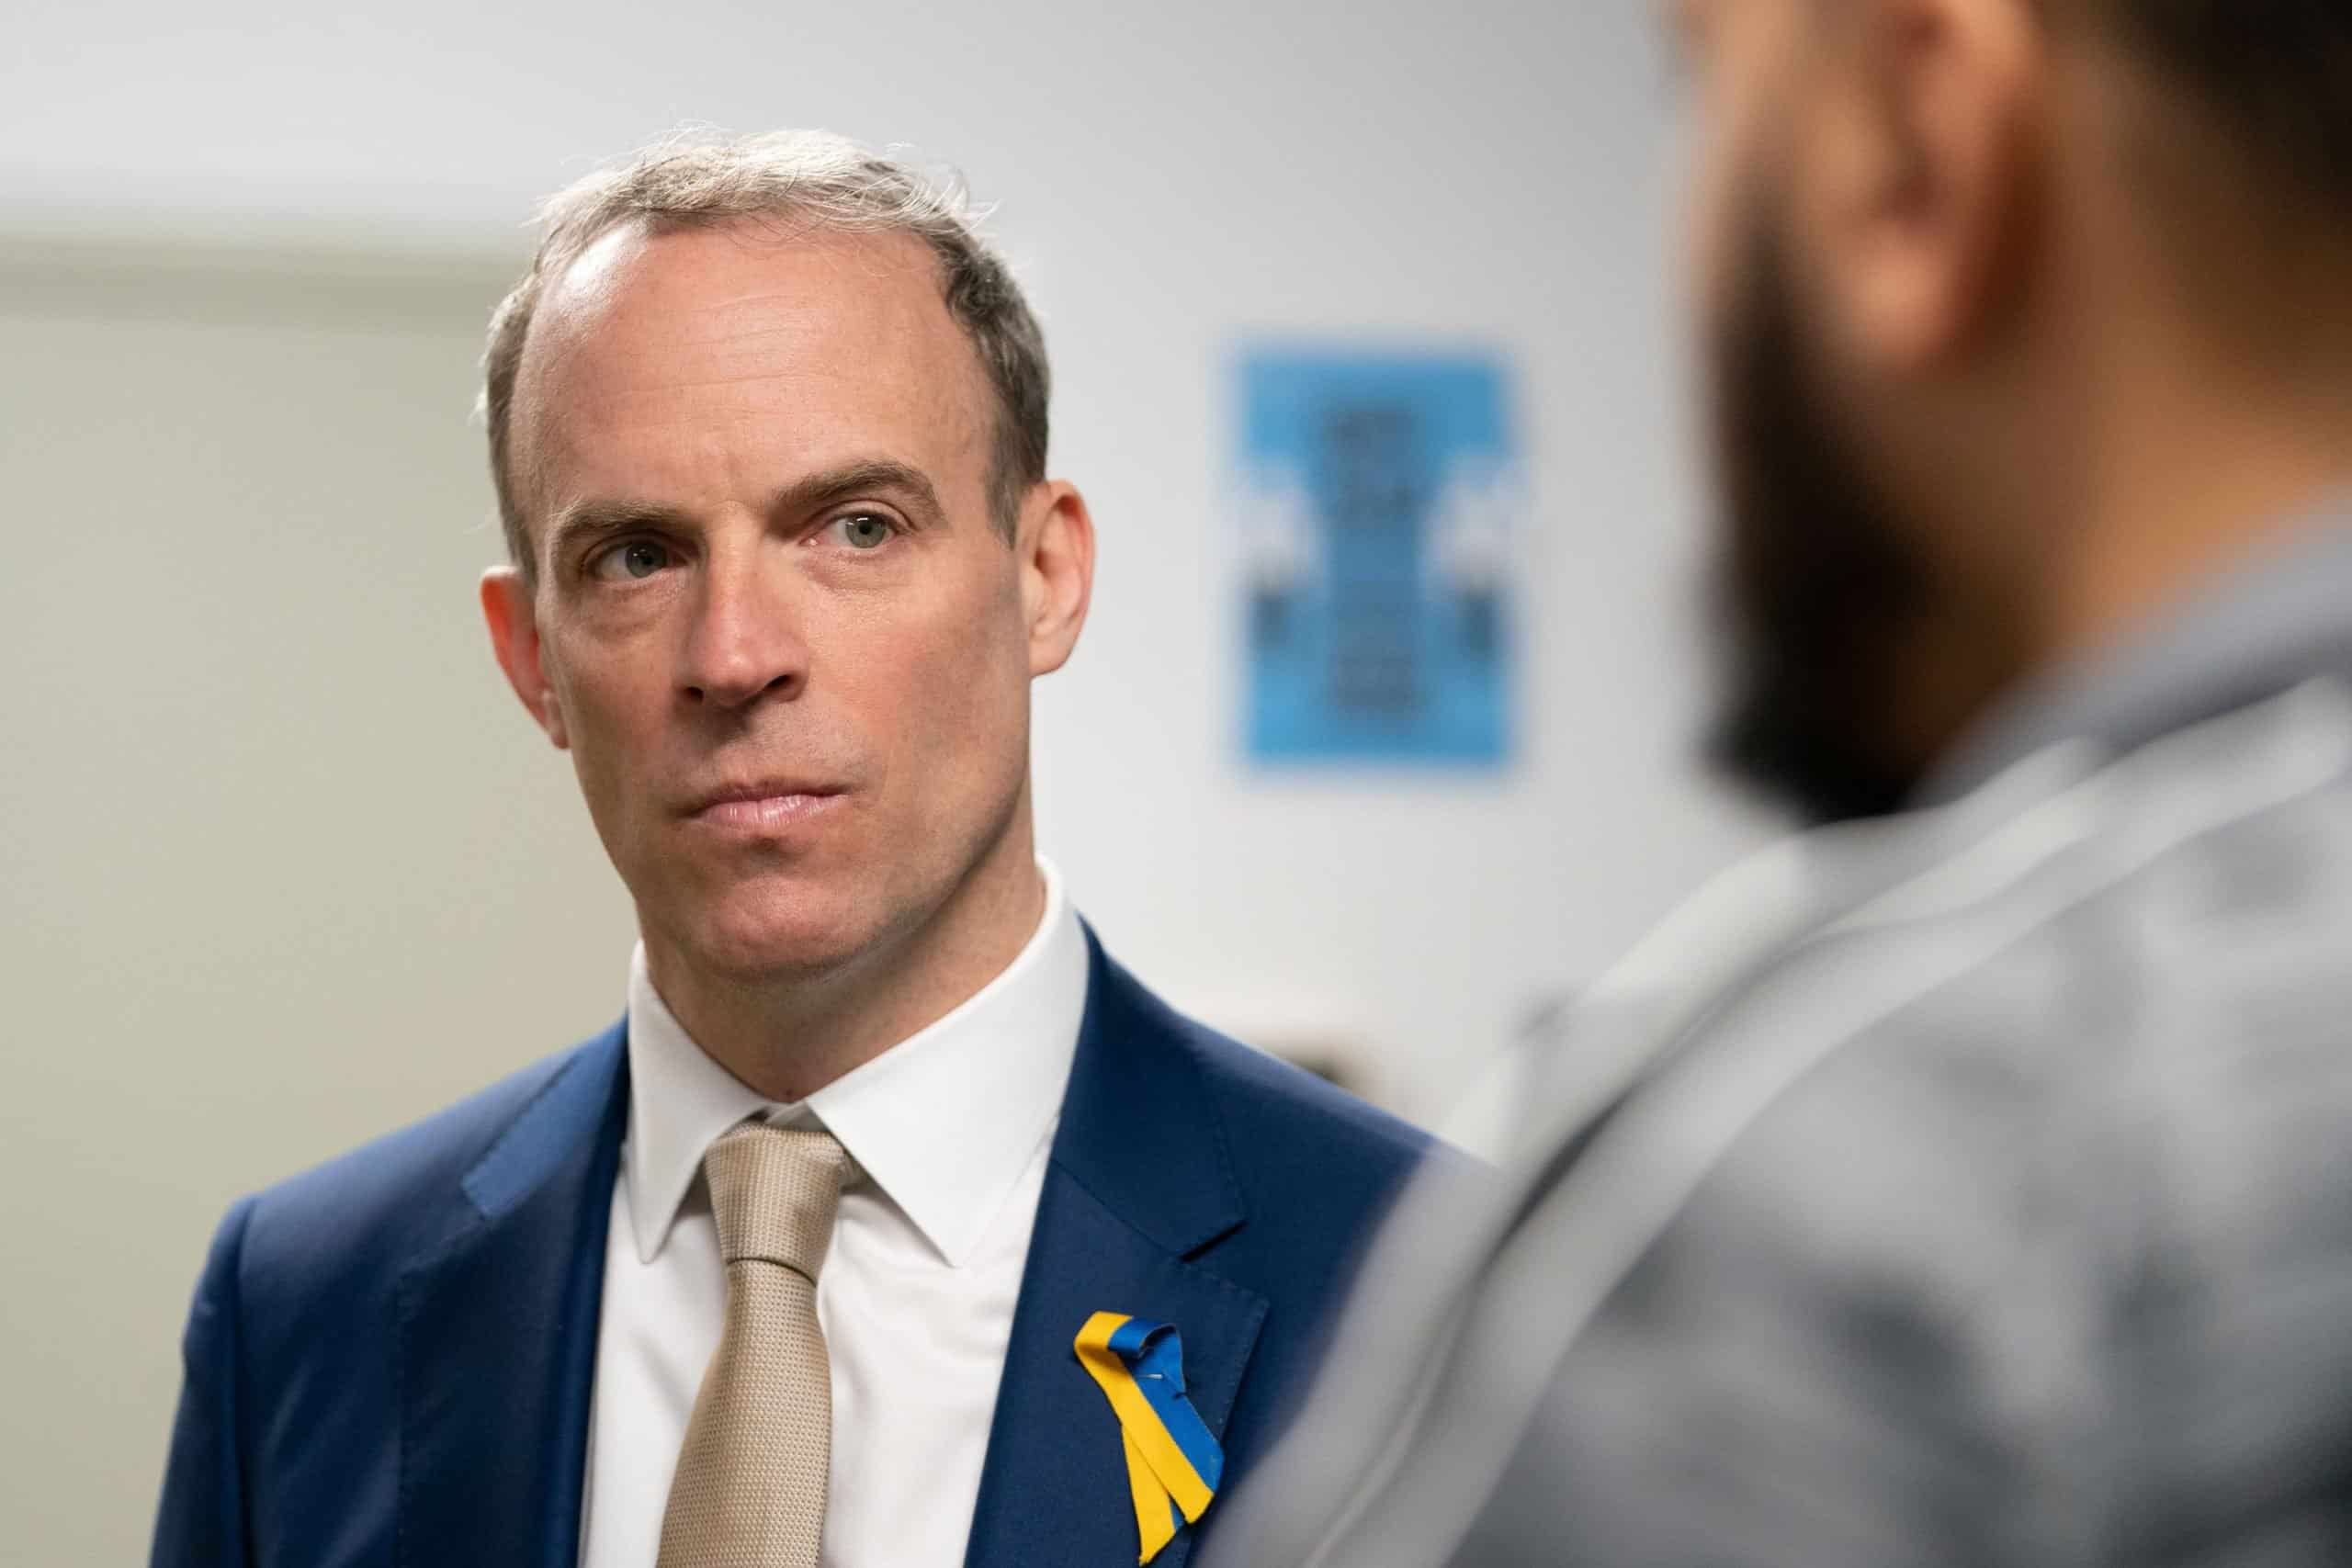 Dominic Raab says there’s a 50/50 chance he’ll lose his seat in next election